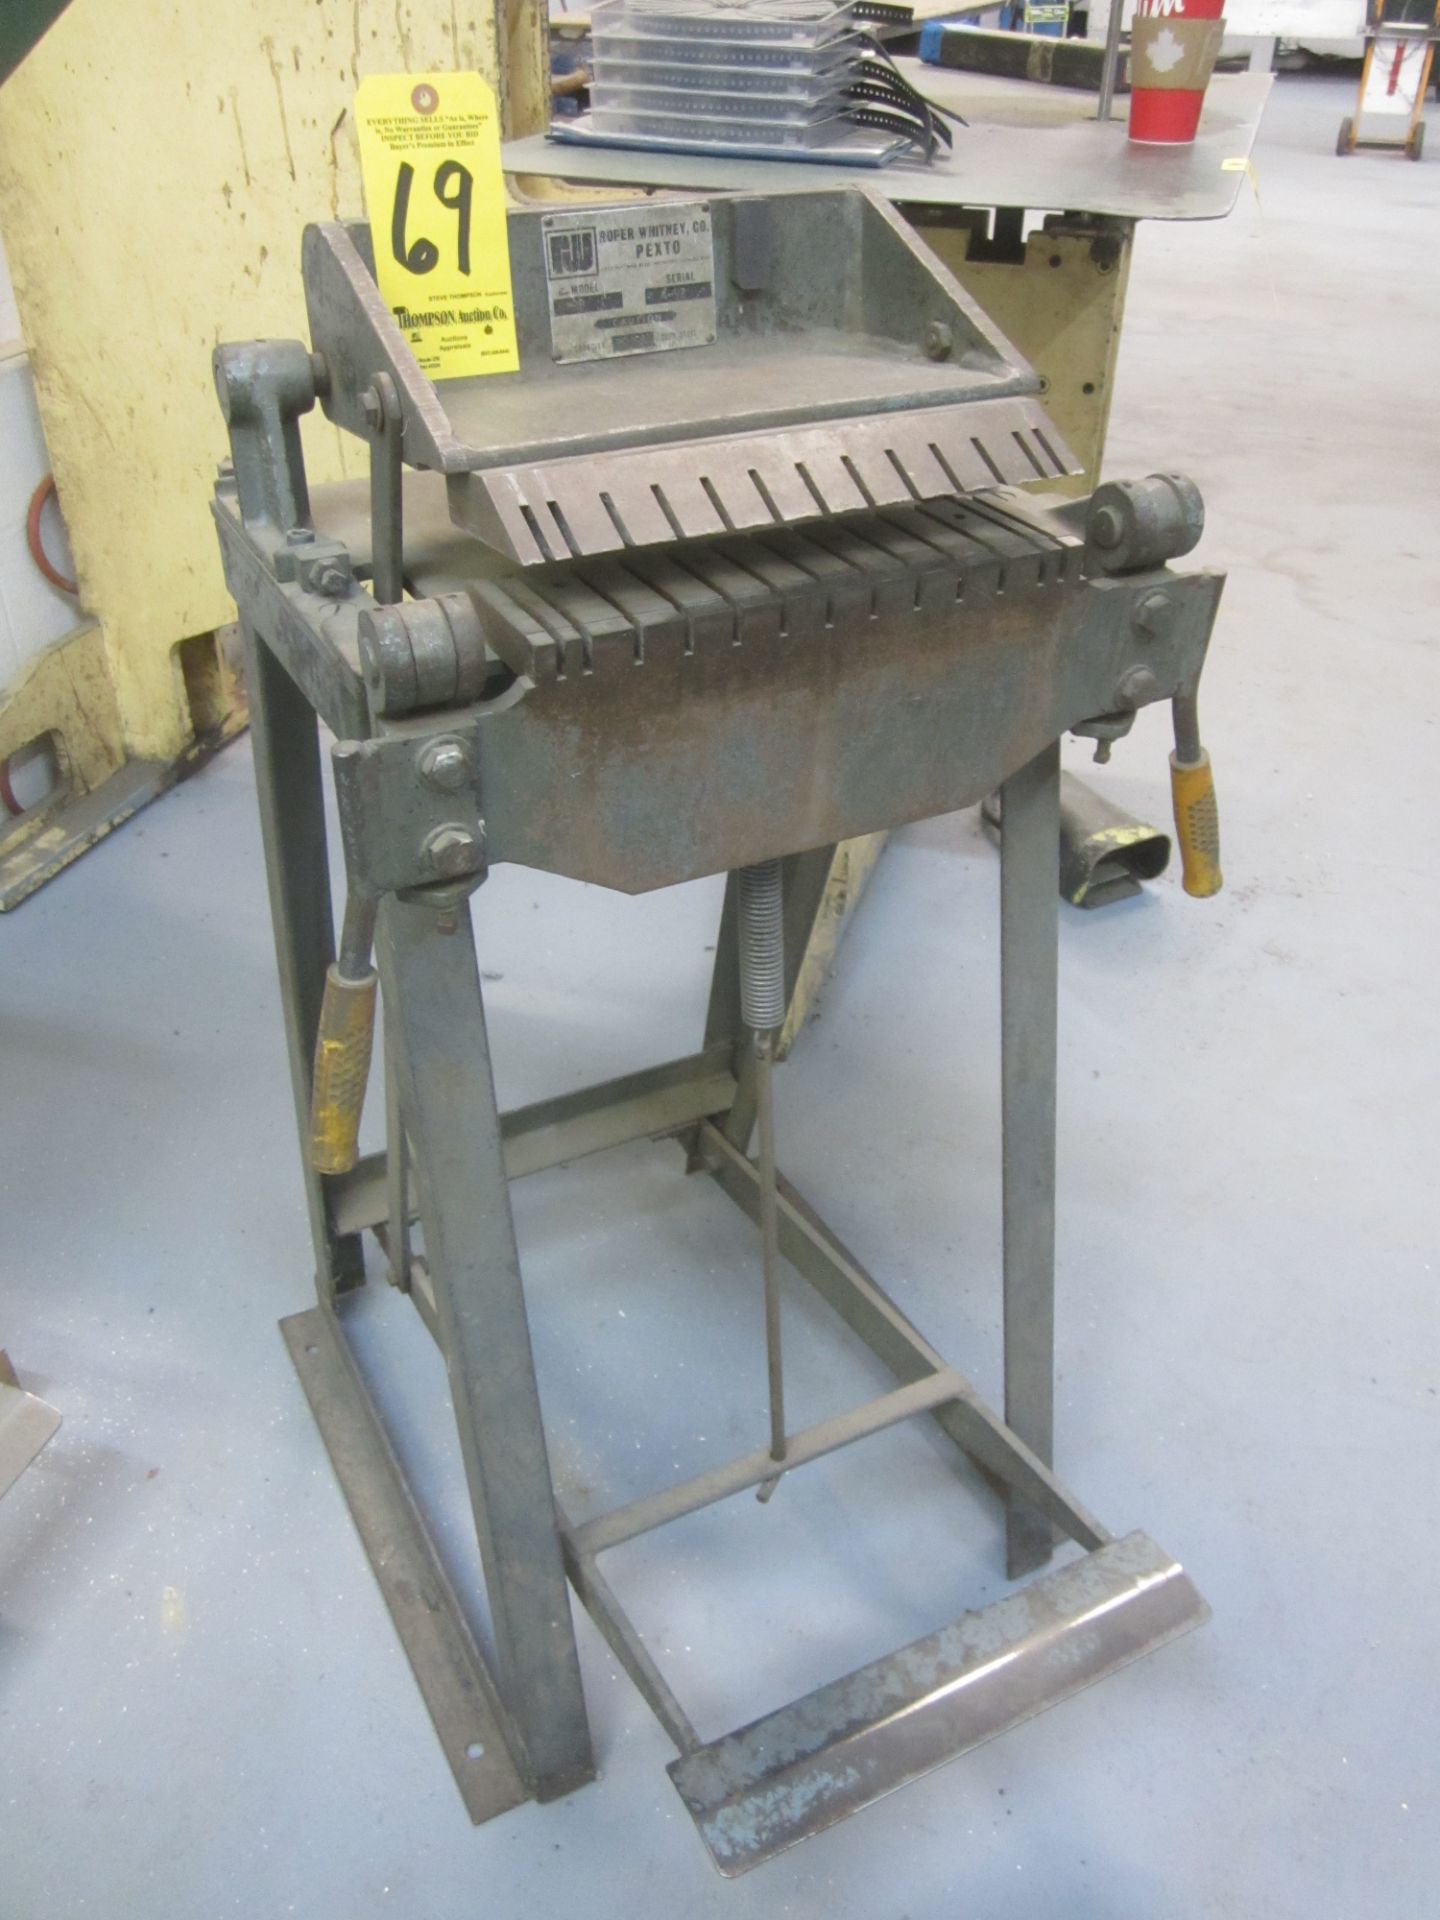 Roper Whitney/Pexto Model 99 Letter Forming Hand Brake, with Stand, s/n 4-92, 12" X 20 Gauge